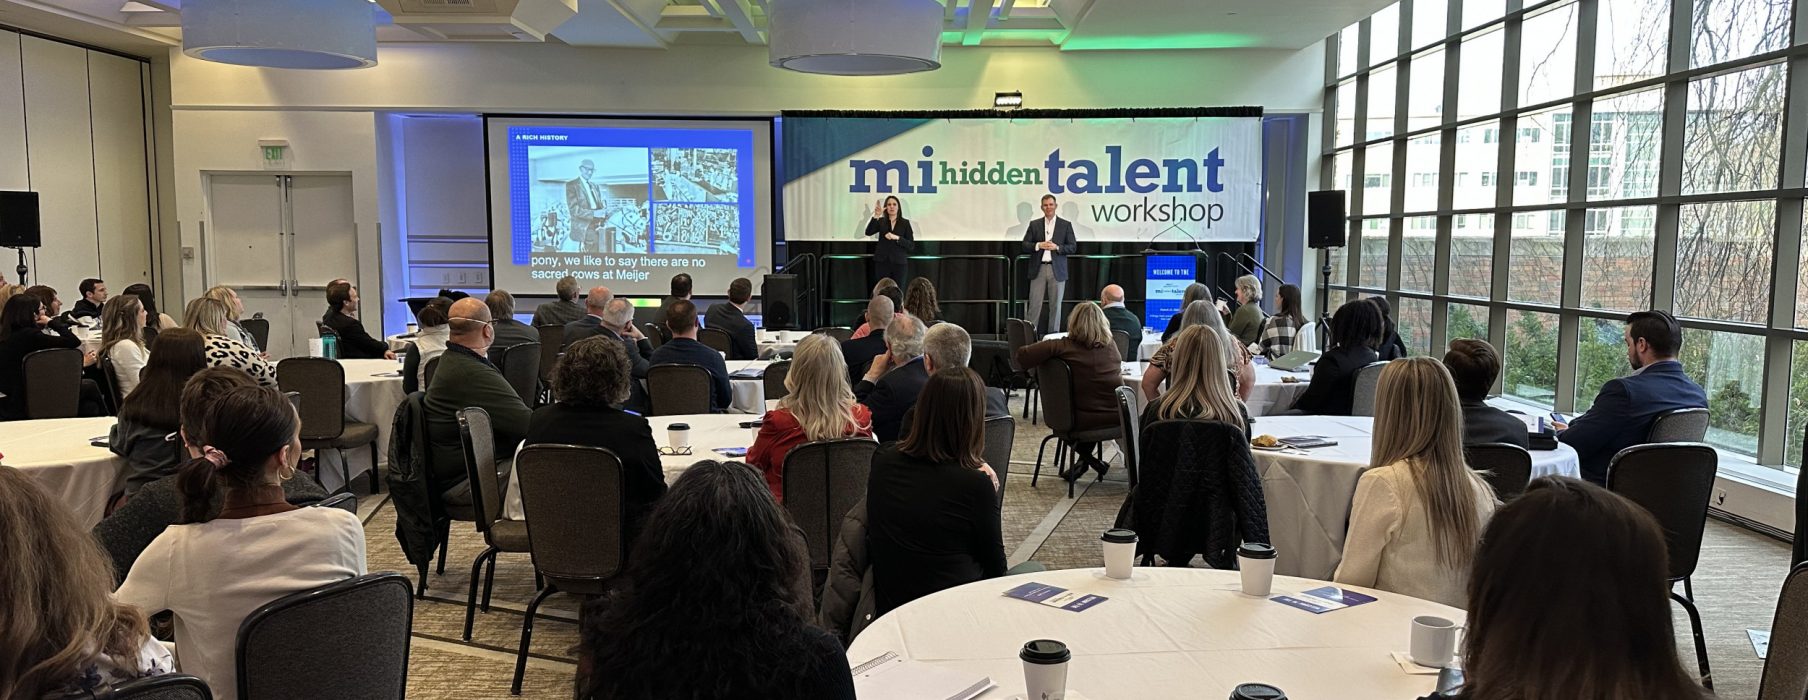 Attendees at the MI Hidden Talent workshop sit at tables and listen to Rick Keyes present.